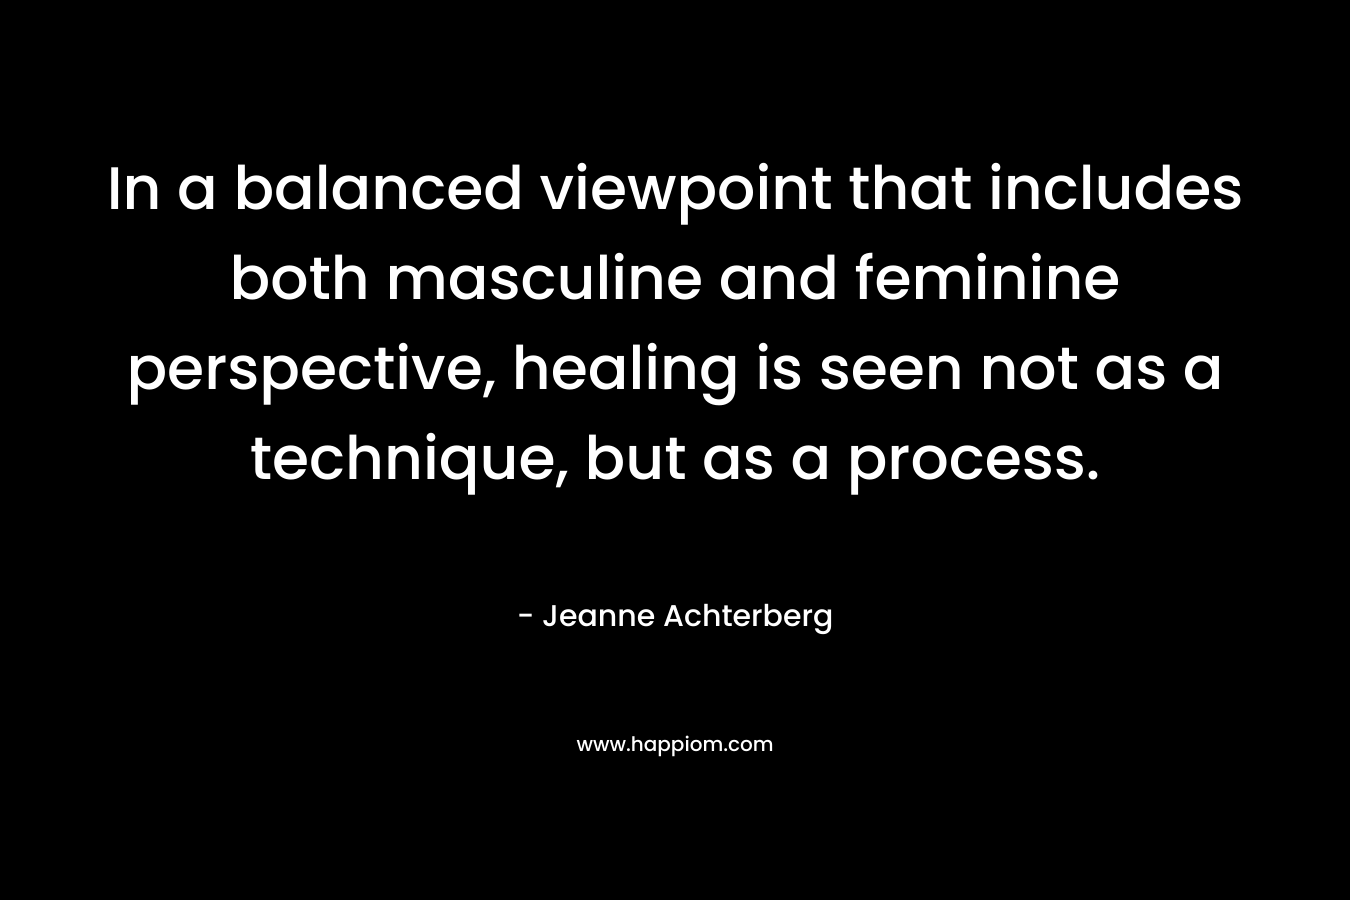 In a balanced viewpoint that includes both masculine and feminine perspective, healing is seen not as a technique, but as a process.